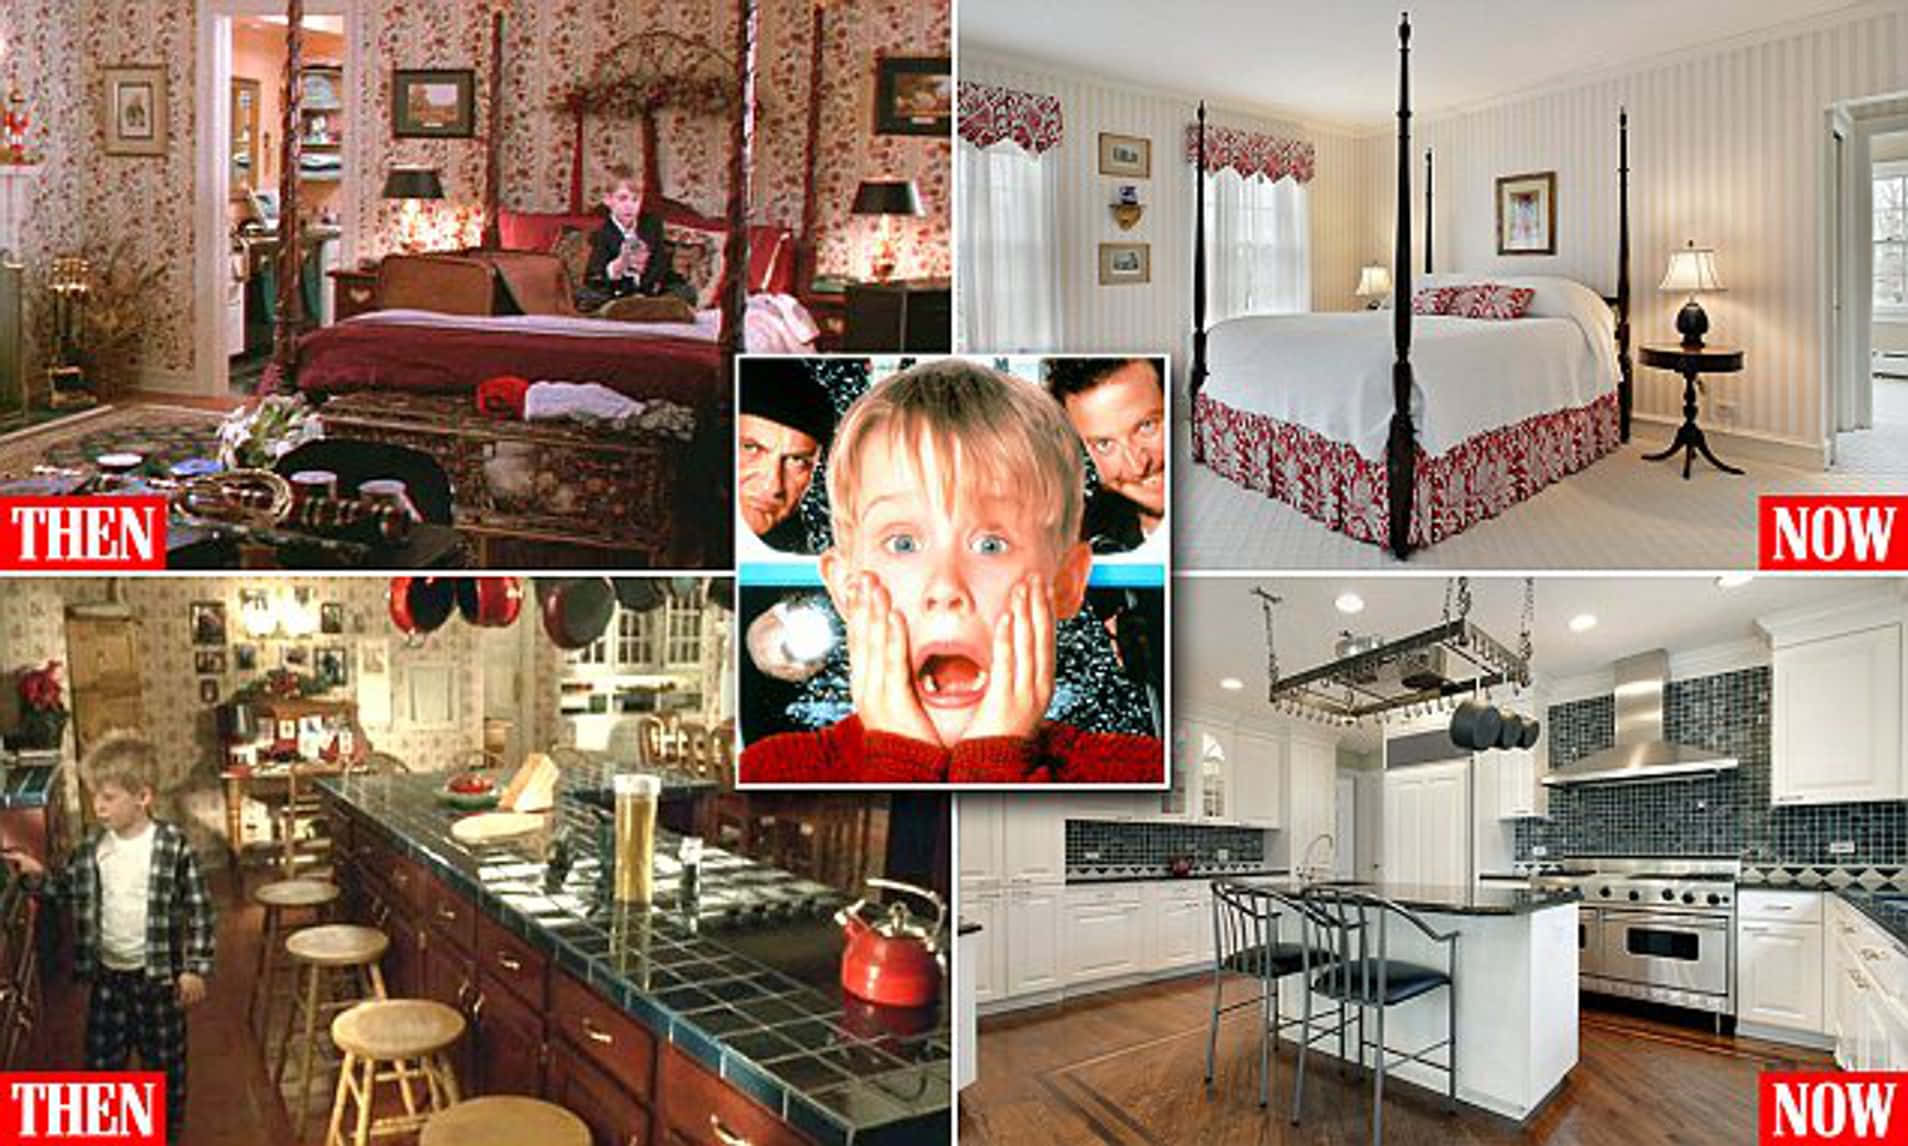 Add some festive flair to your next Zoom call with this Home Alone-inspired background